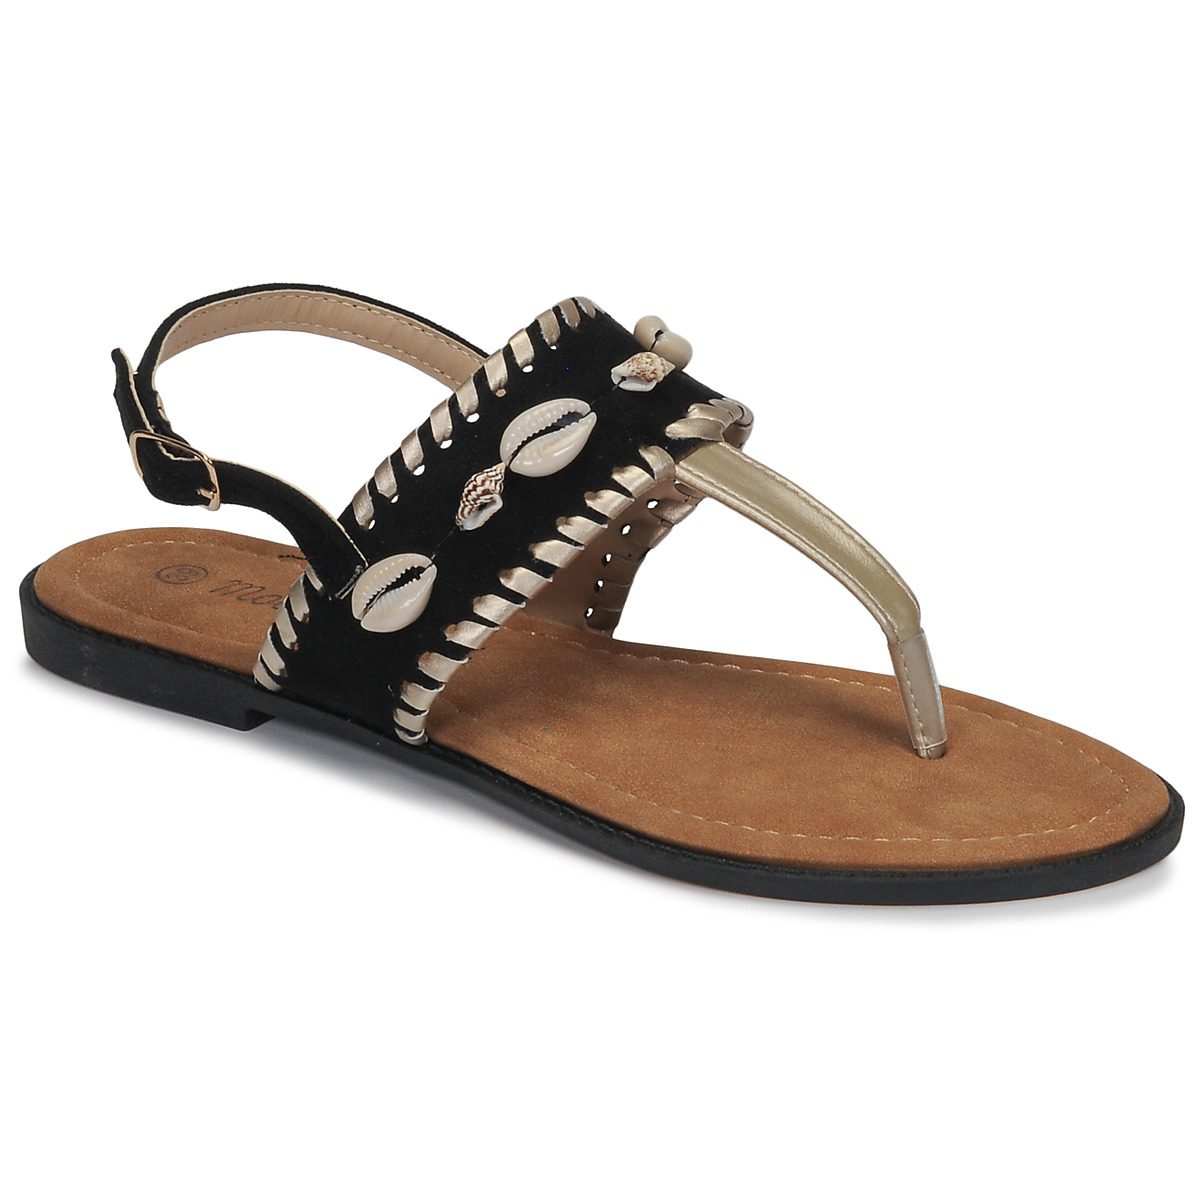 Spartoo - Black Sandals for Women from Moony Mood GOOFASH